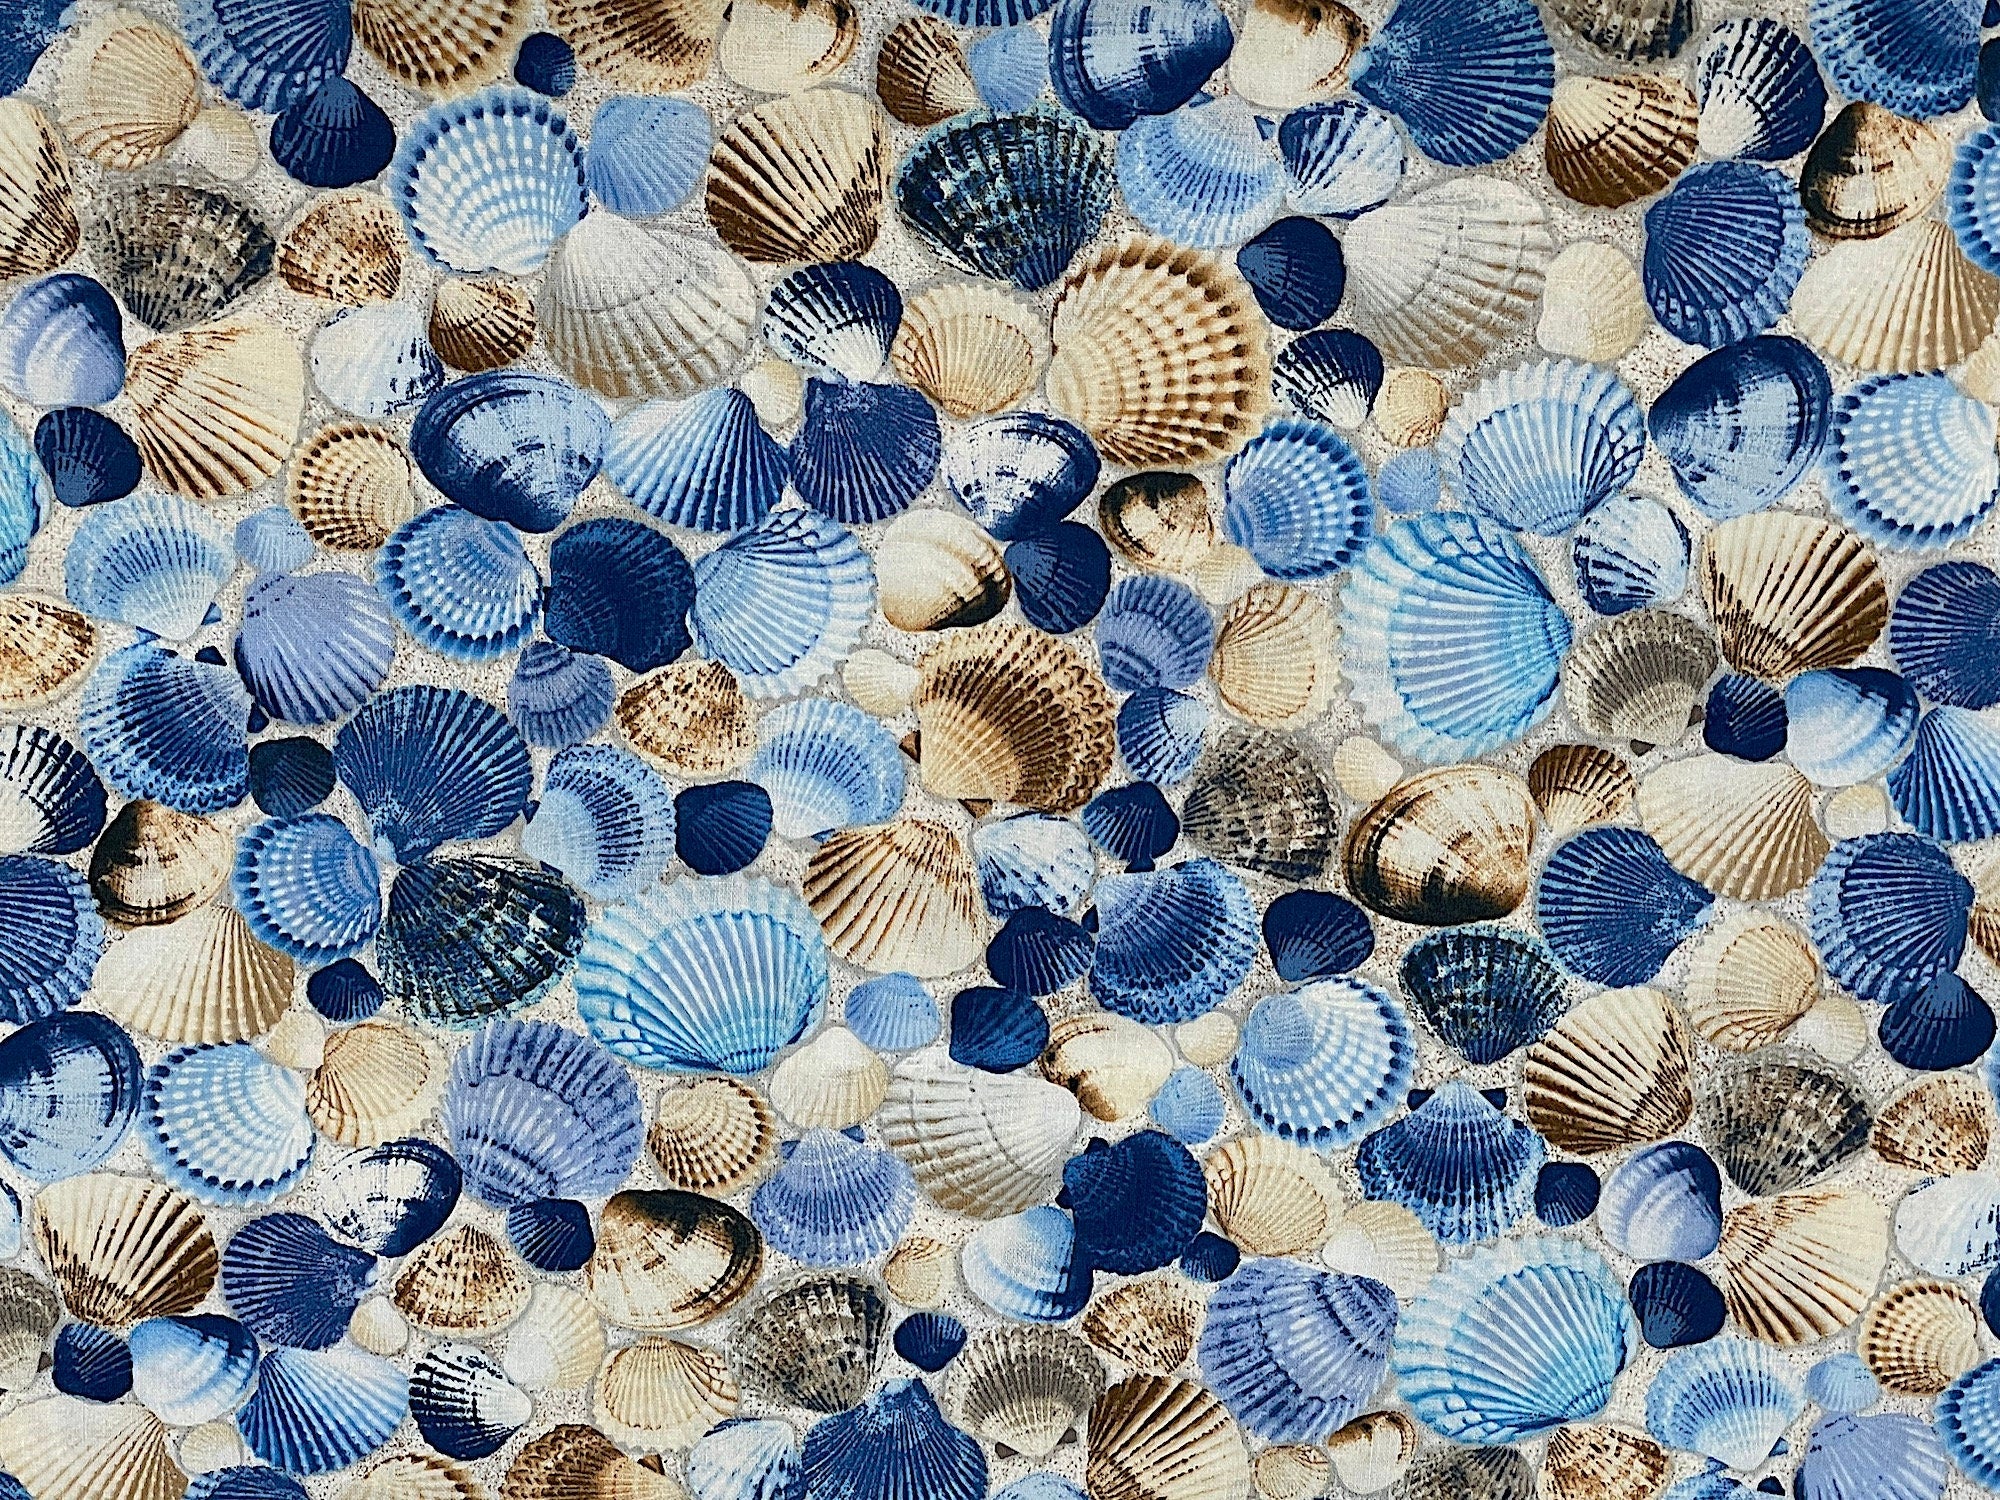 This cotton fabric is covered with seashells that are shades of blue and beige.